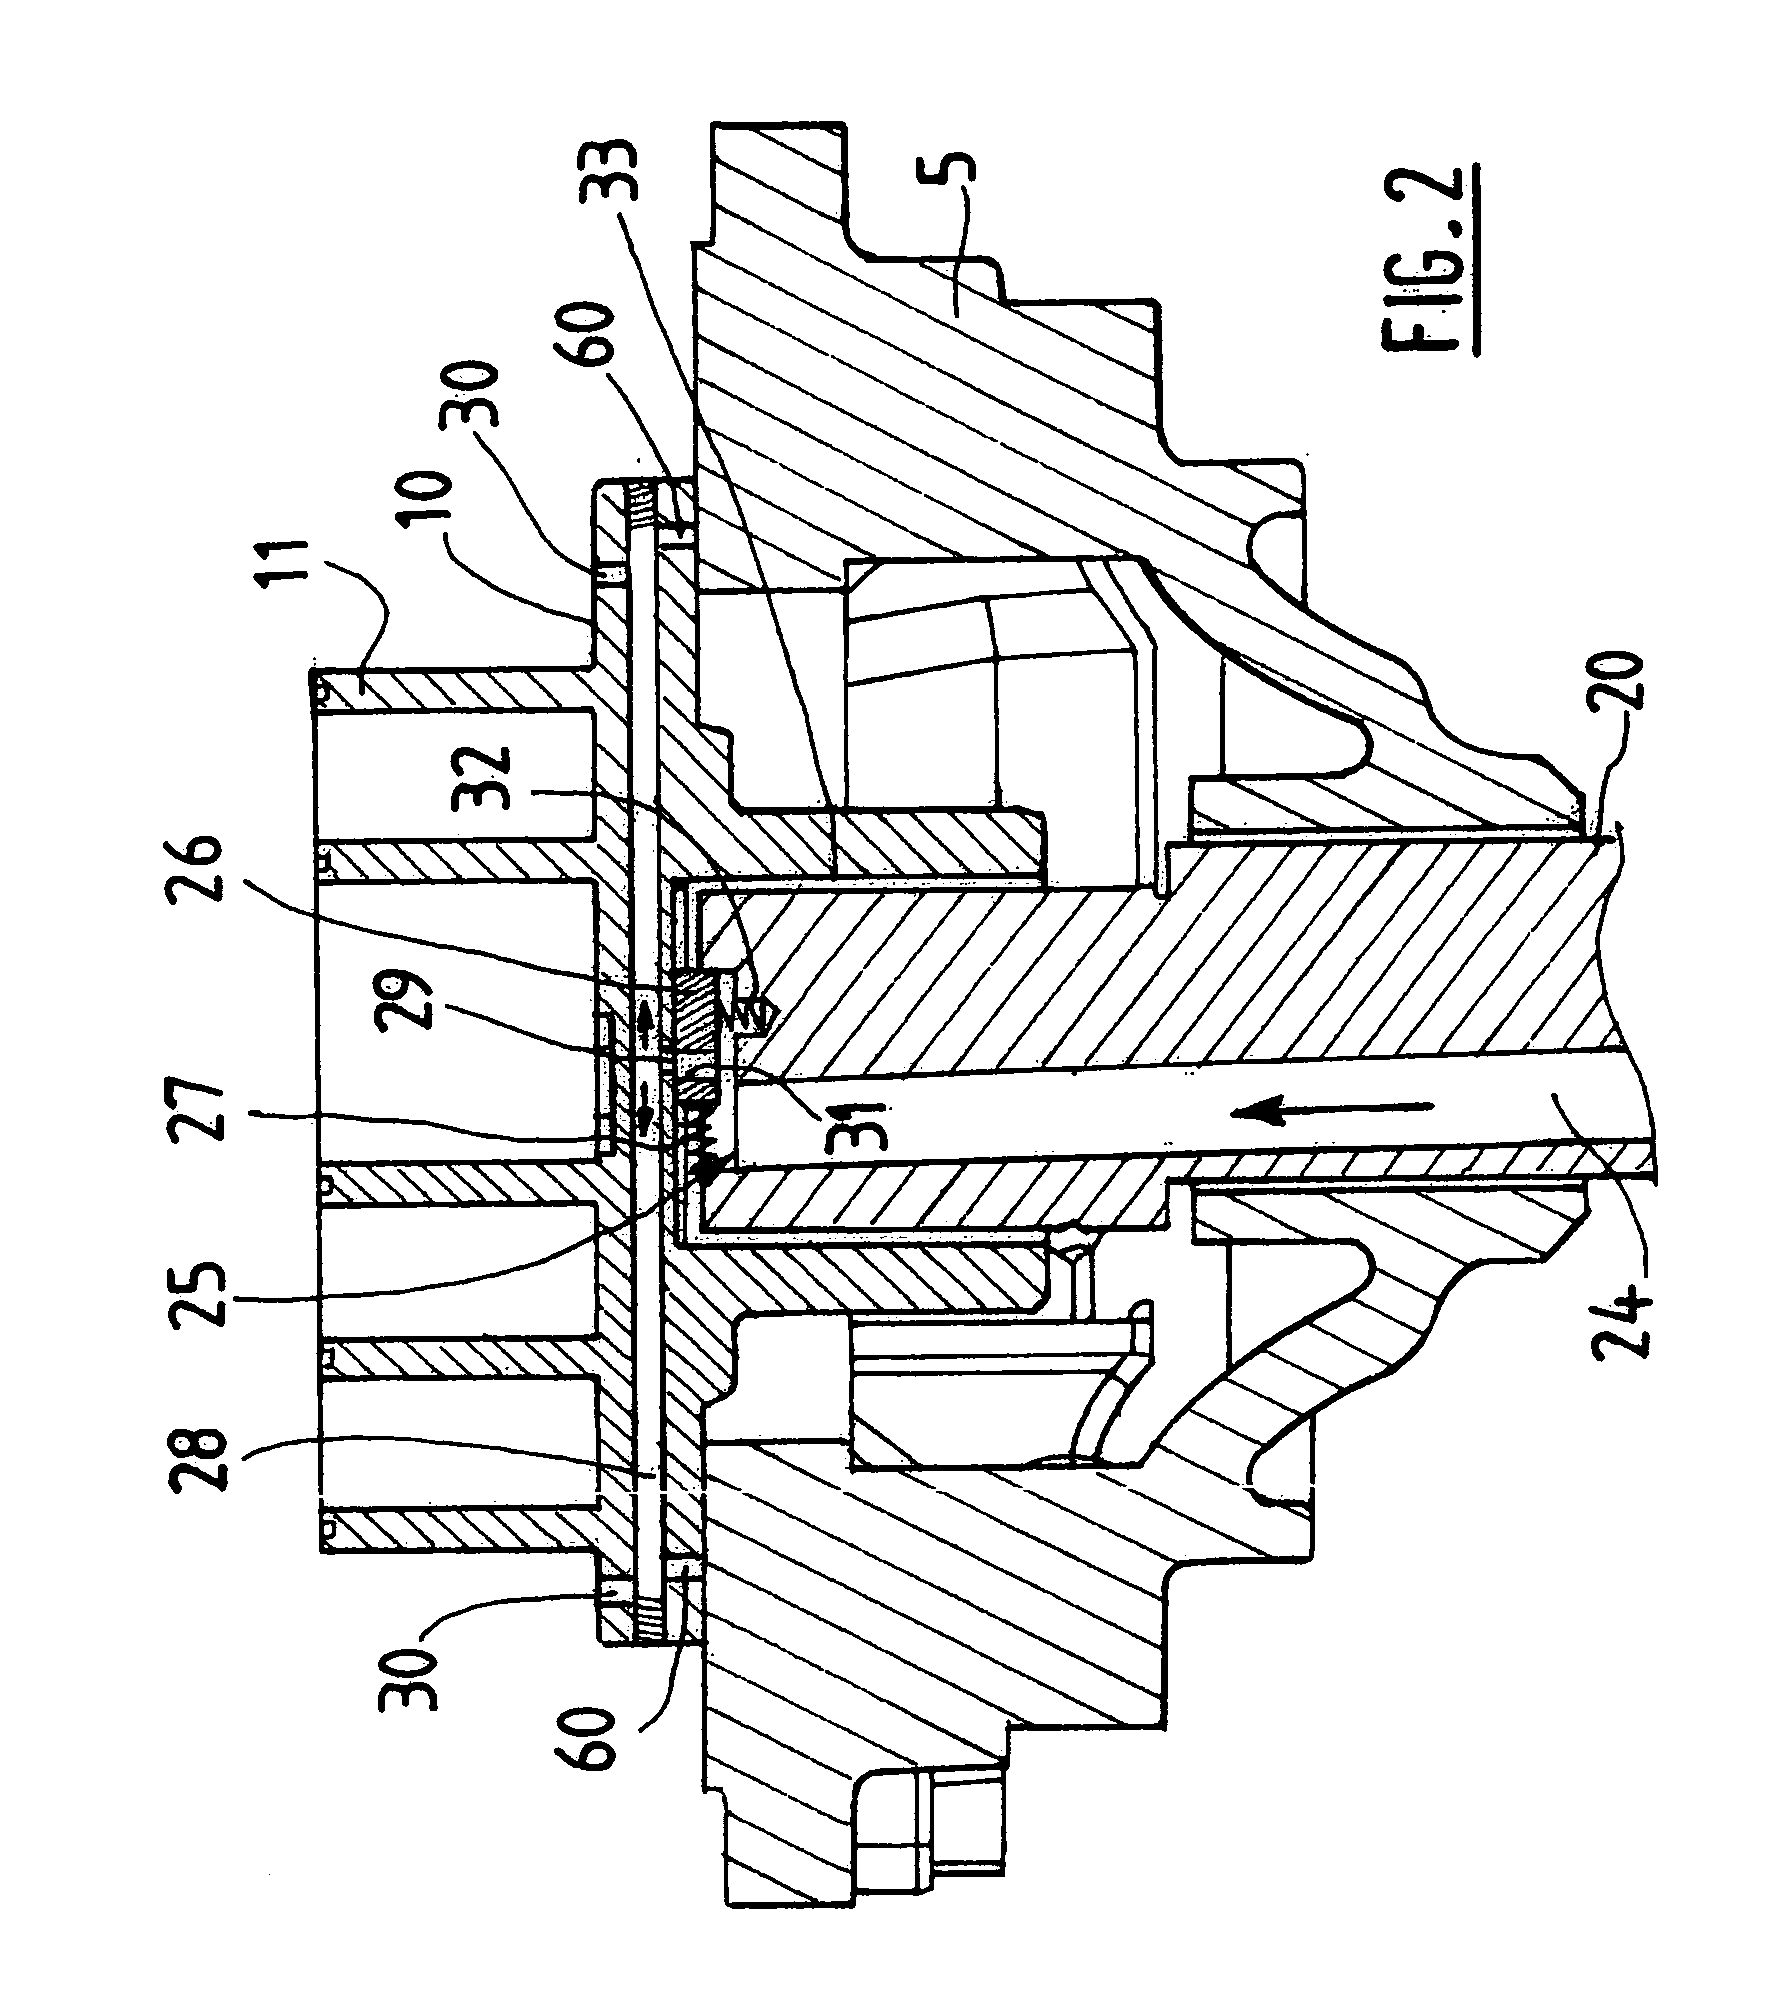 Refrigerating compressor with variable-speed coils